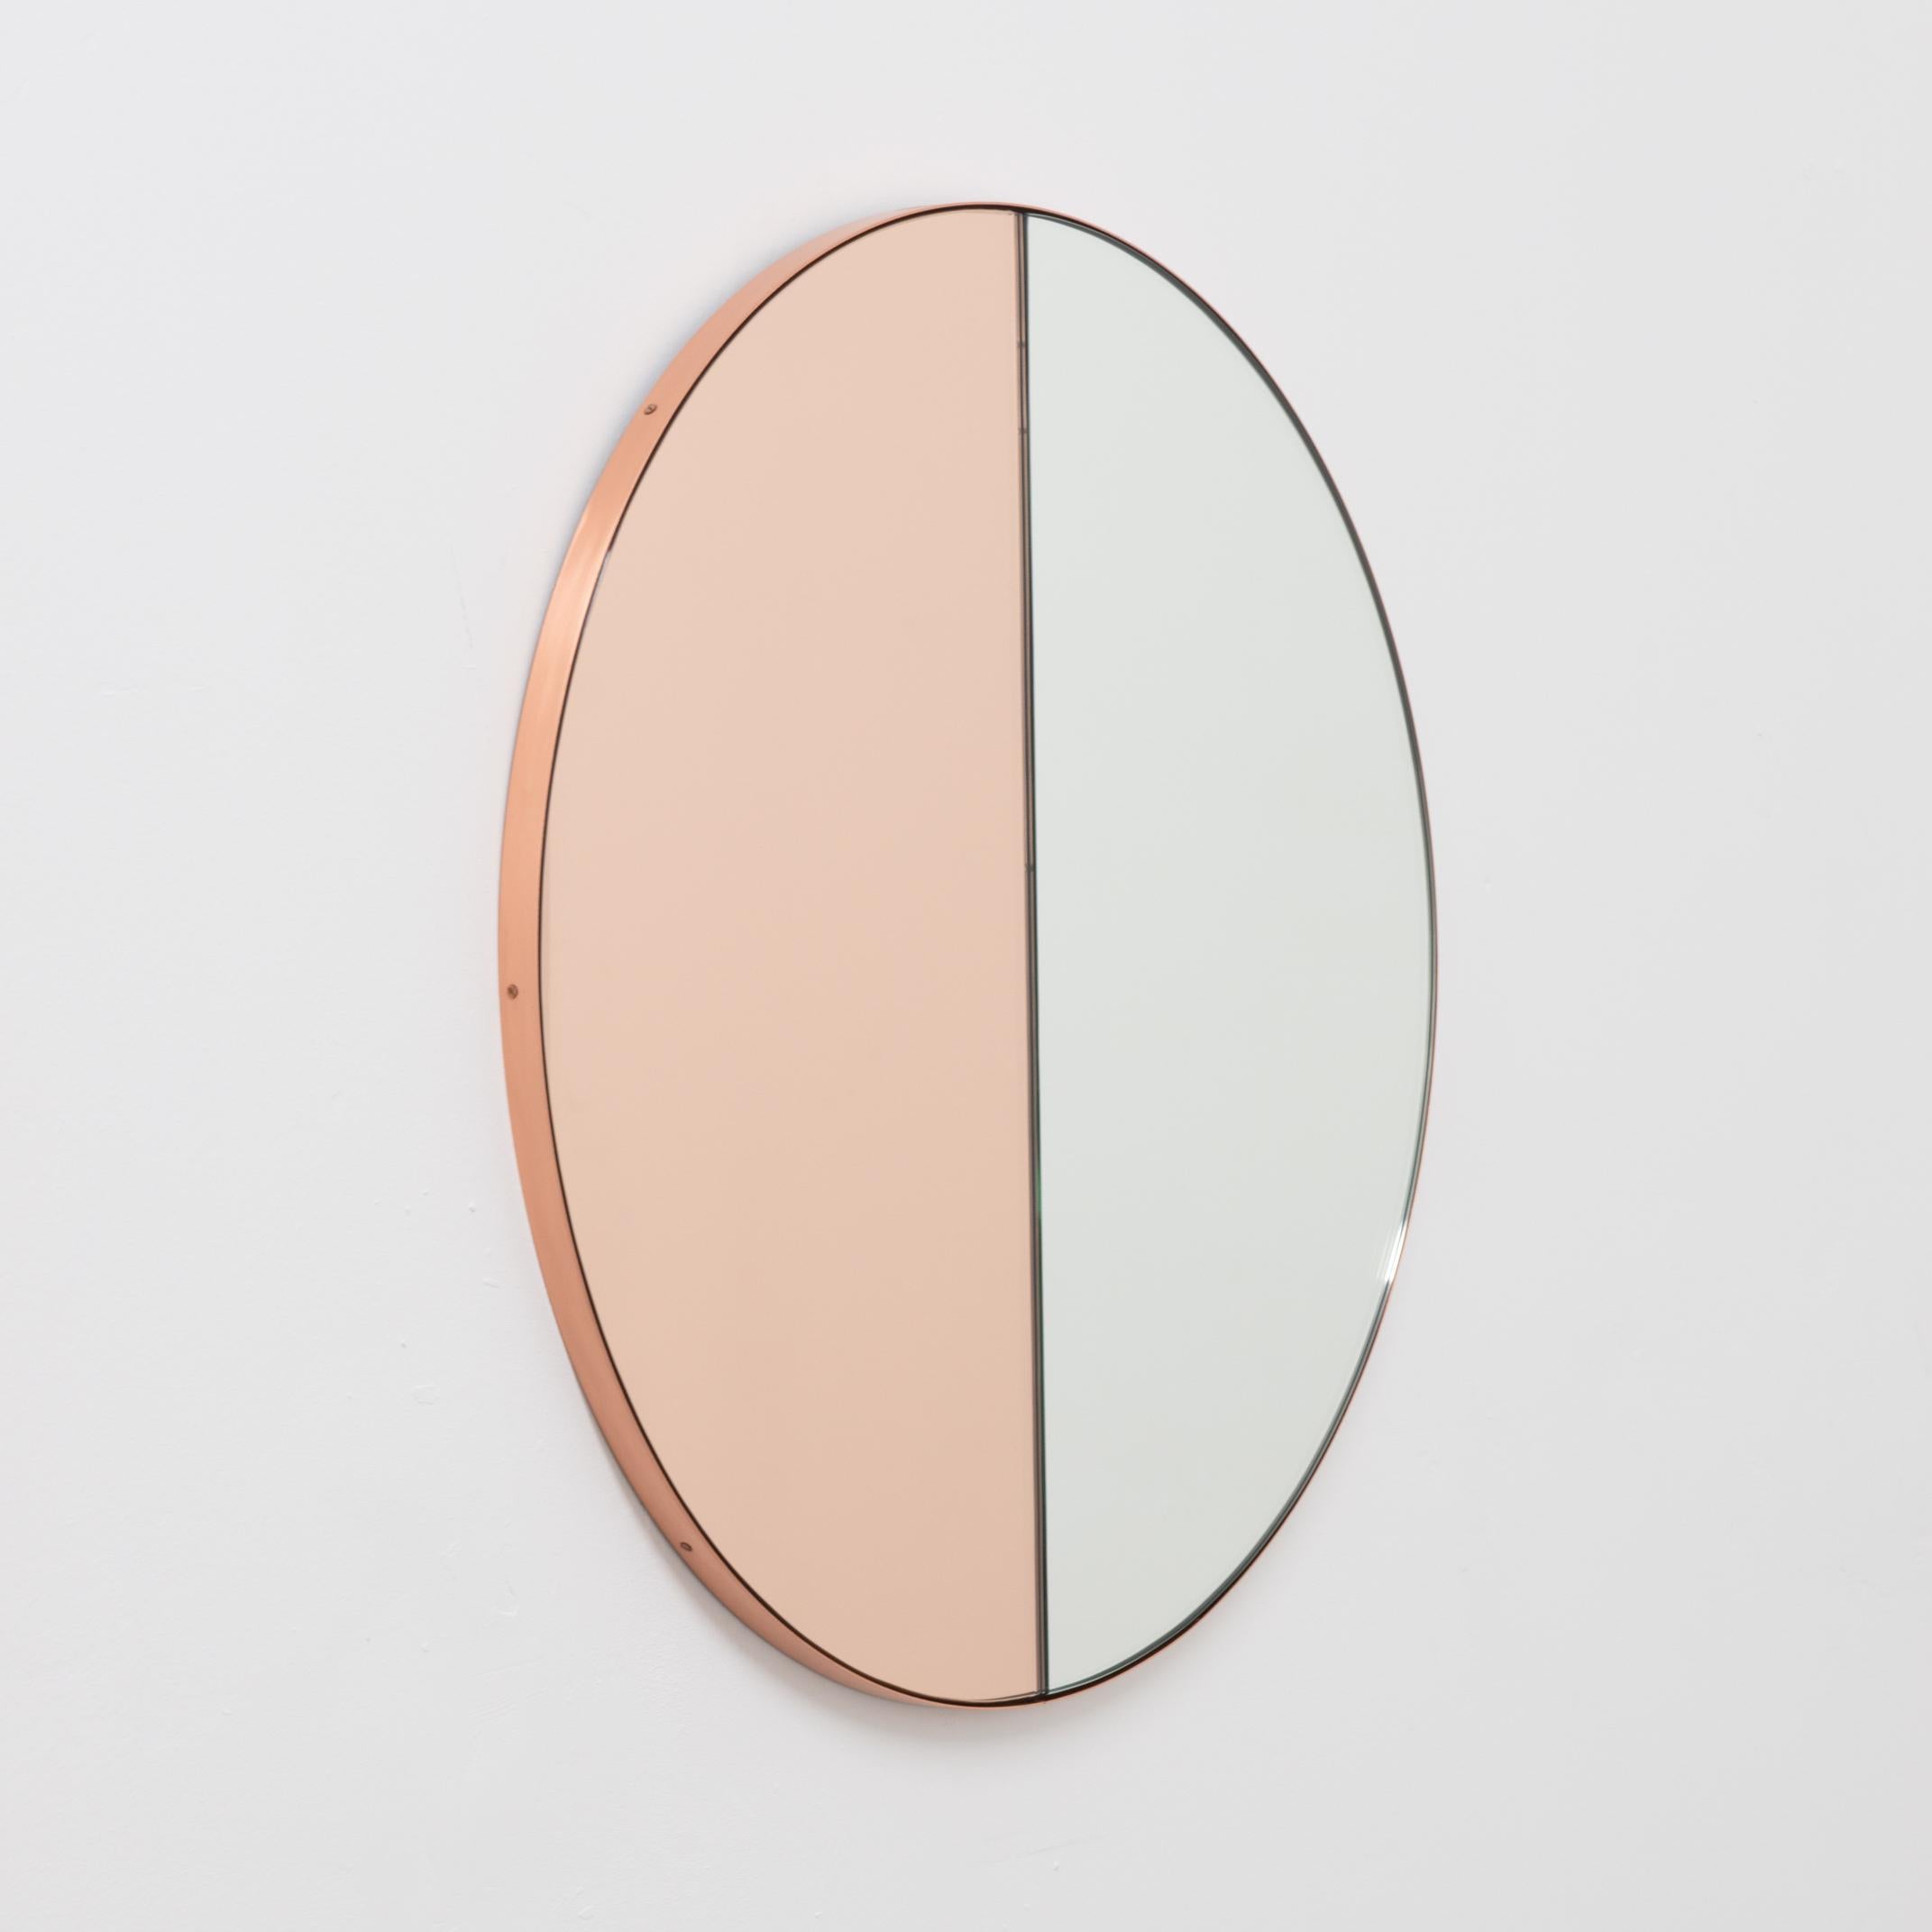 British Orbis Dualis Mixed Rose Gold and Silver Round Mirror with Copper Frame, Medium For Sale